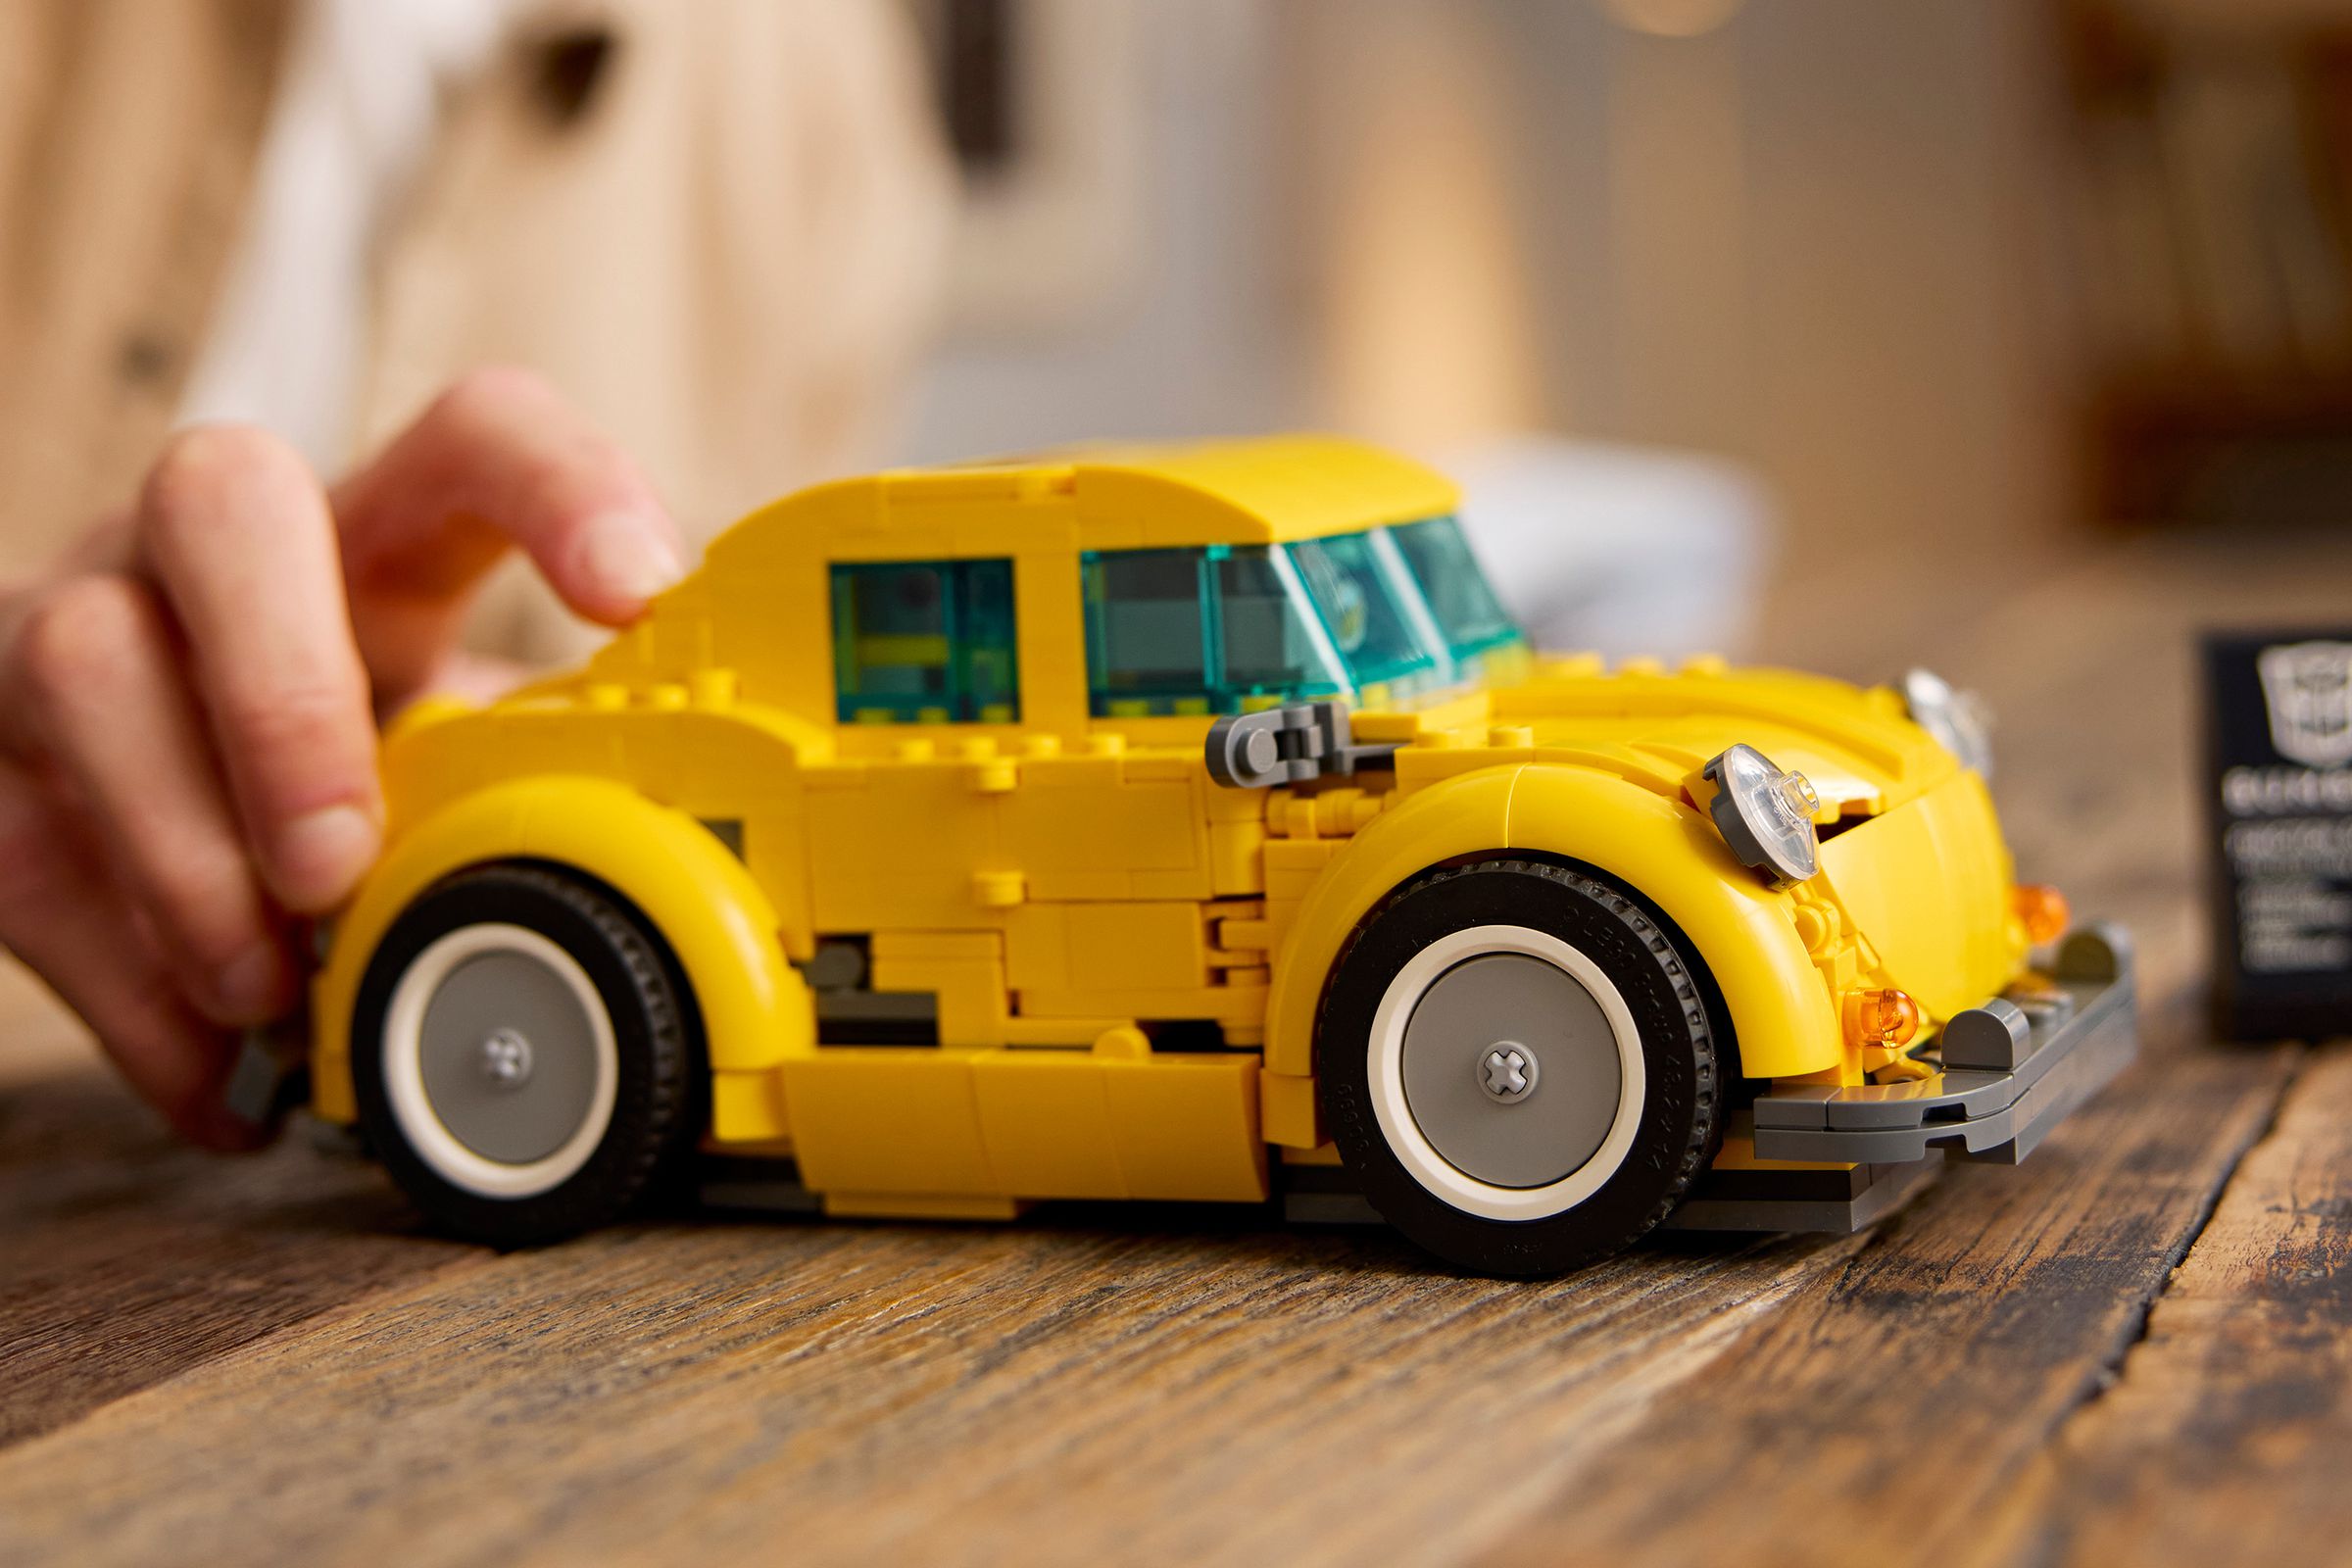 Lego’s buildable Bumblebee model in vehicle mode on a wooden table.